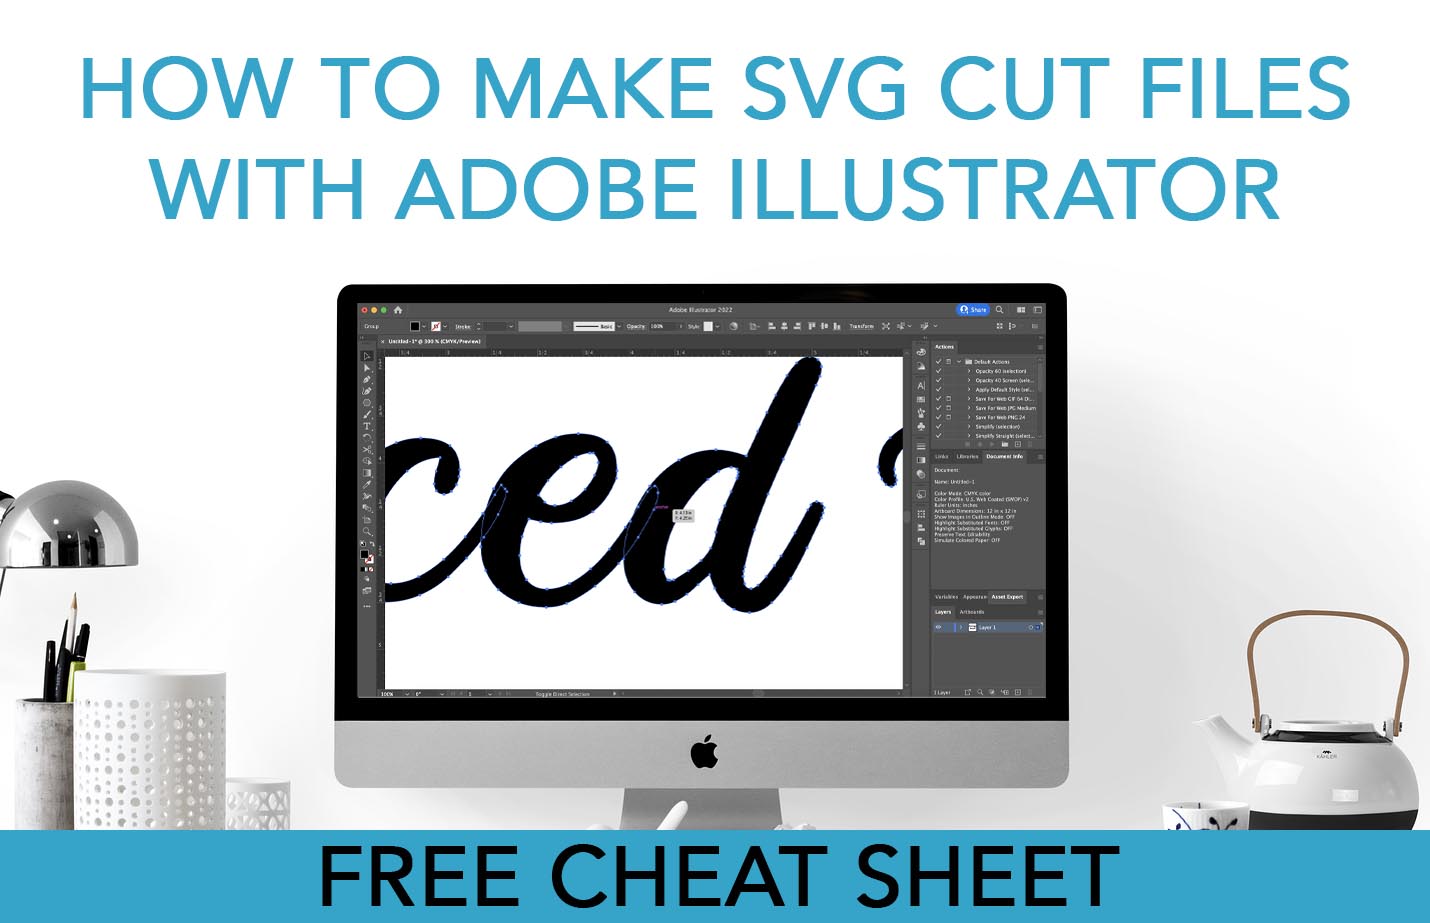 How to make an SVG cut file with Adobe Illustrator